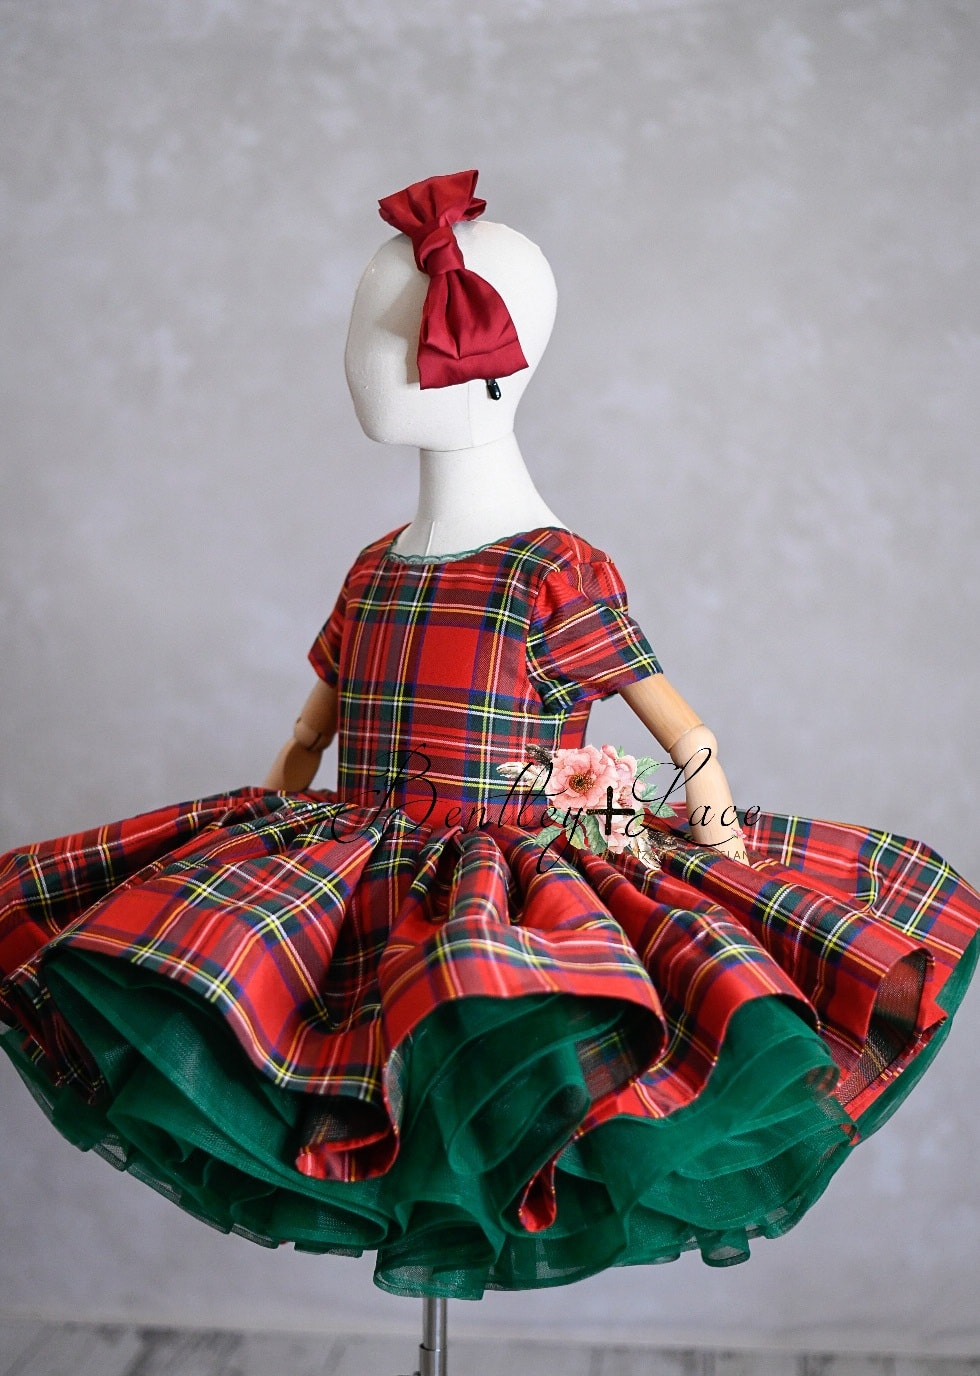 Couture gown rental: "Darling Plaid" Red Vintage Dress Cap Sleeve ( 5 Year - Petite 6 Year)